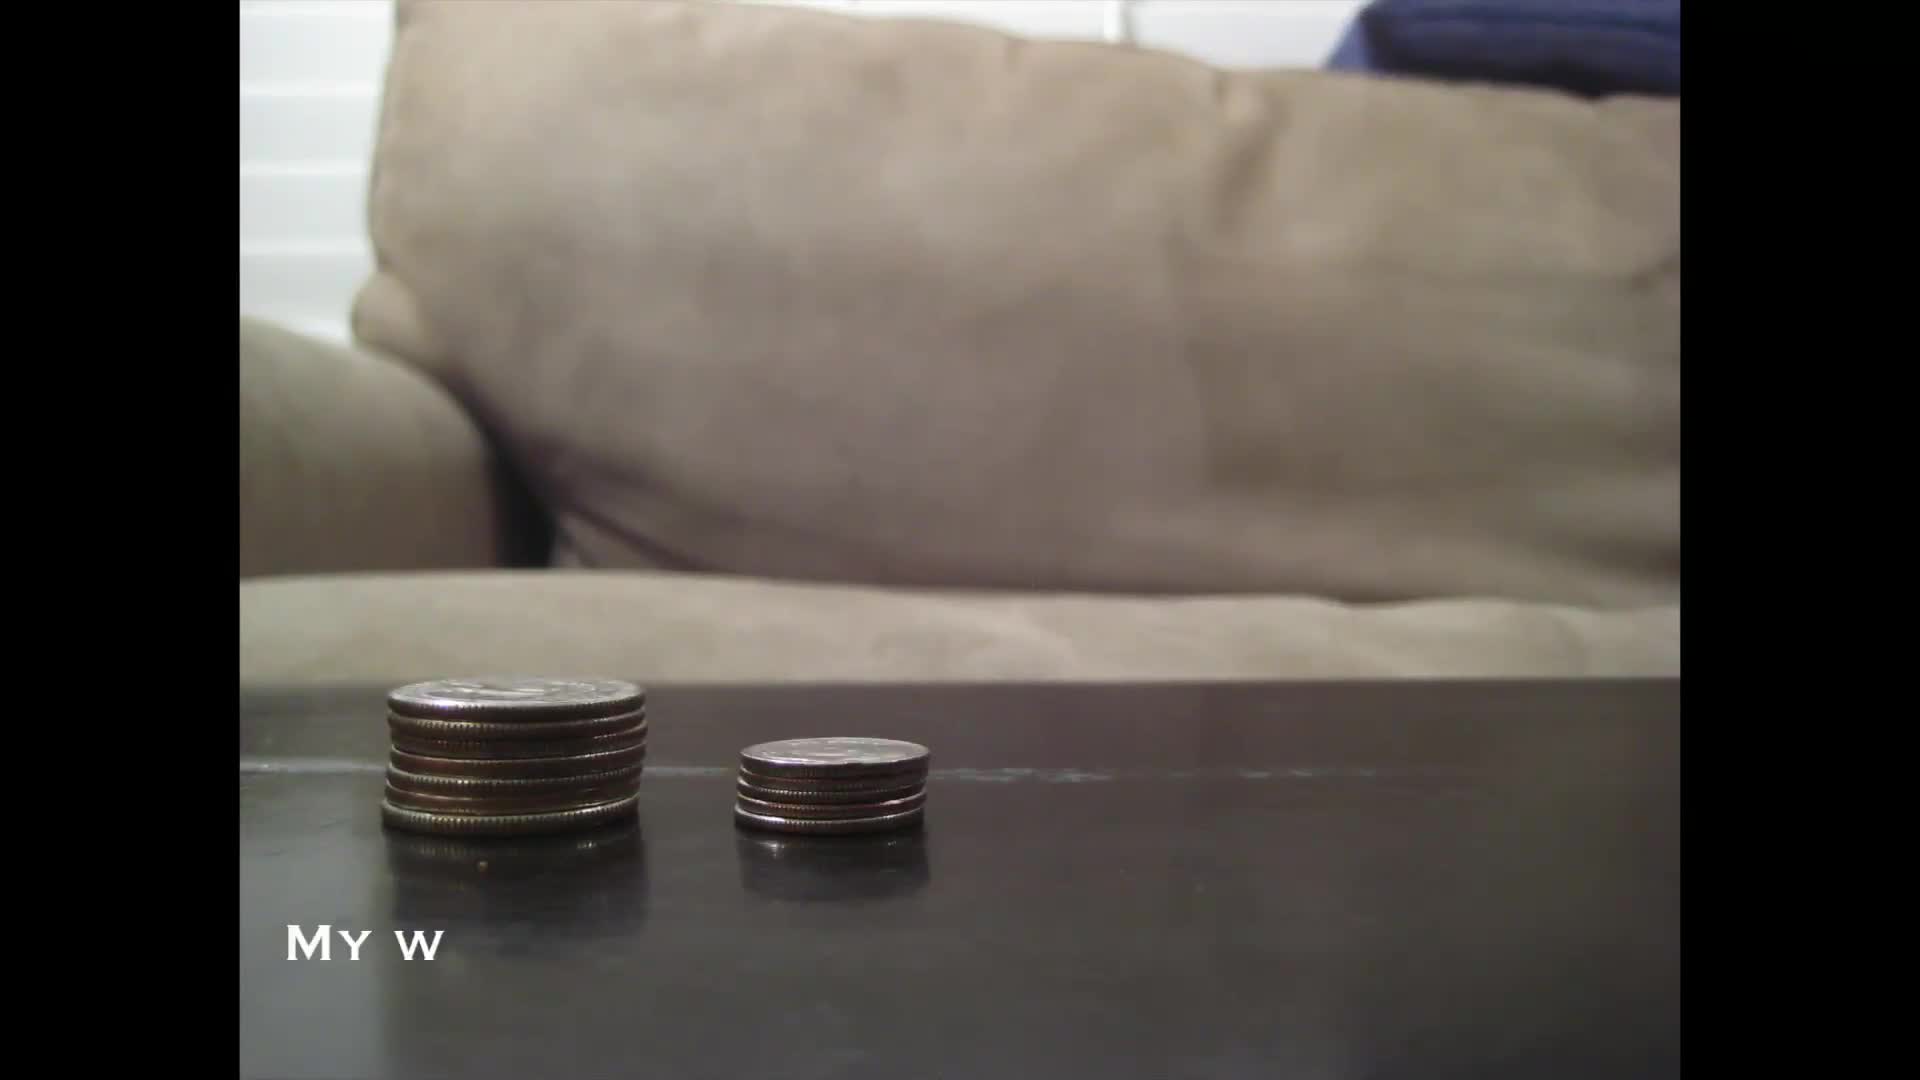 Couch Coins